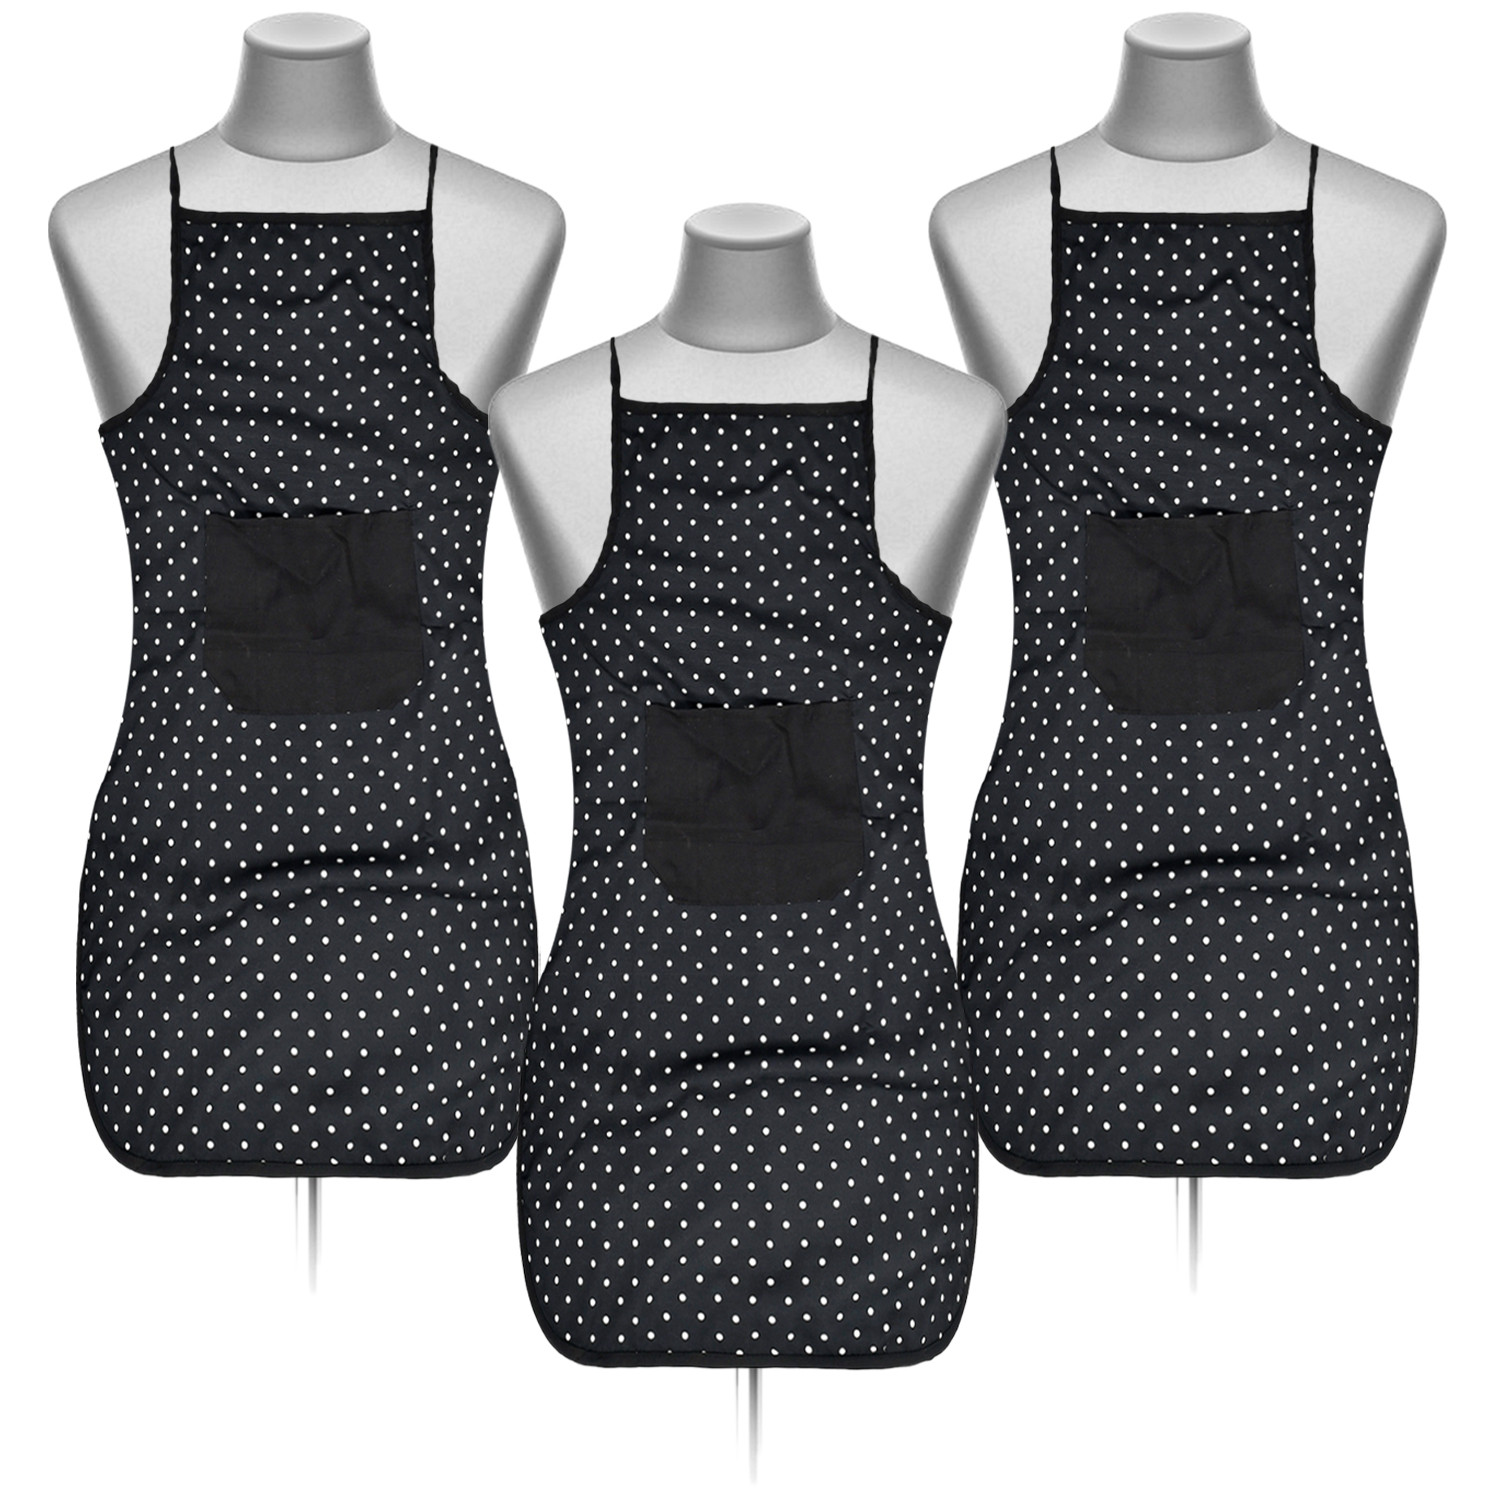 Kuber Industries Dot Printed Apron with 1 Front Pocket (Black)